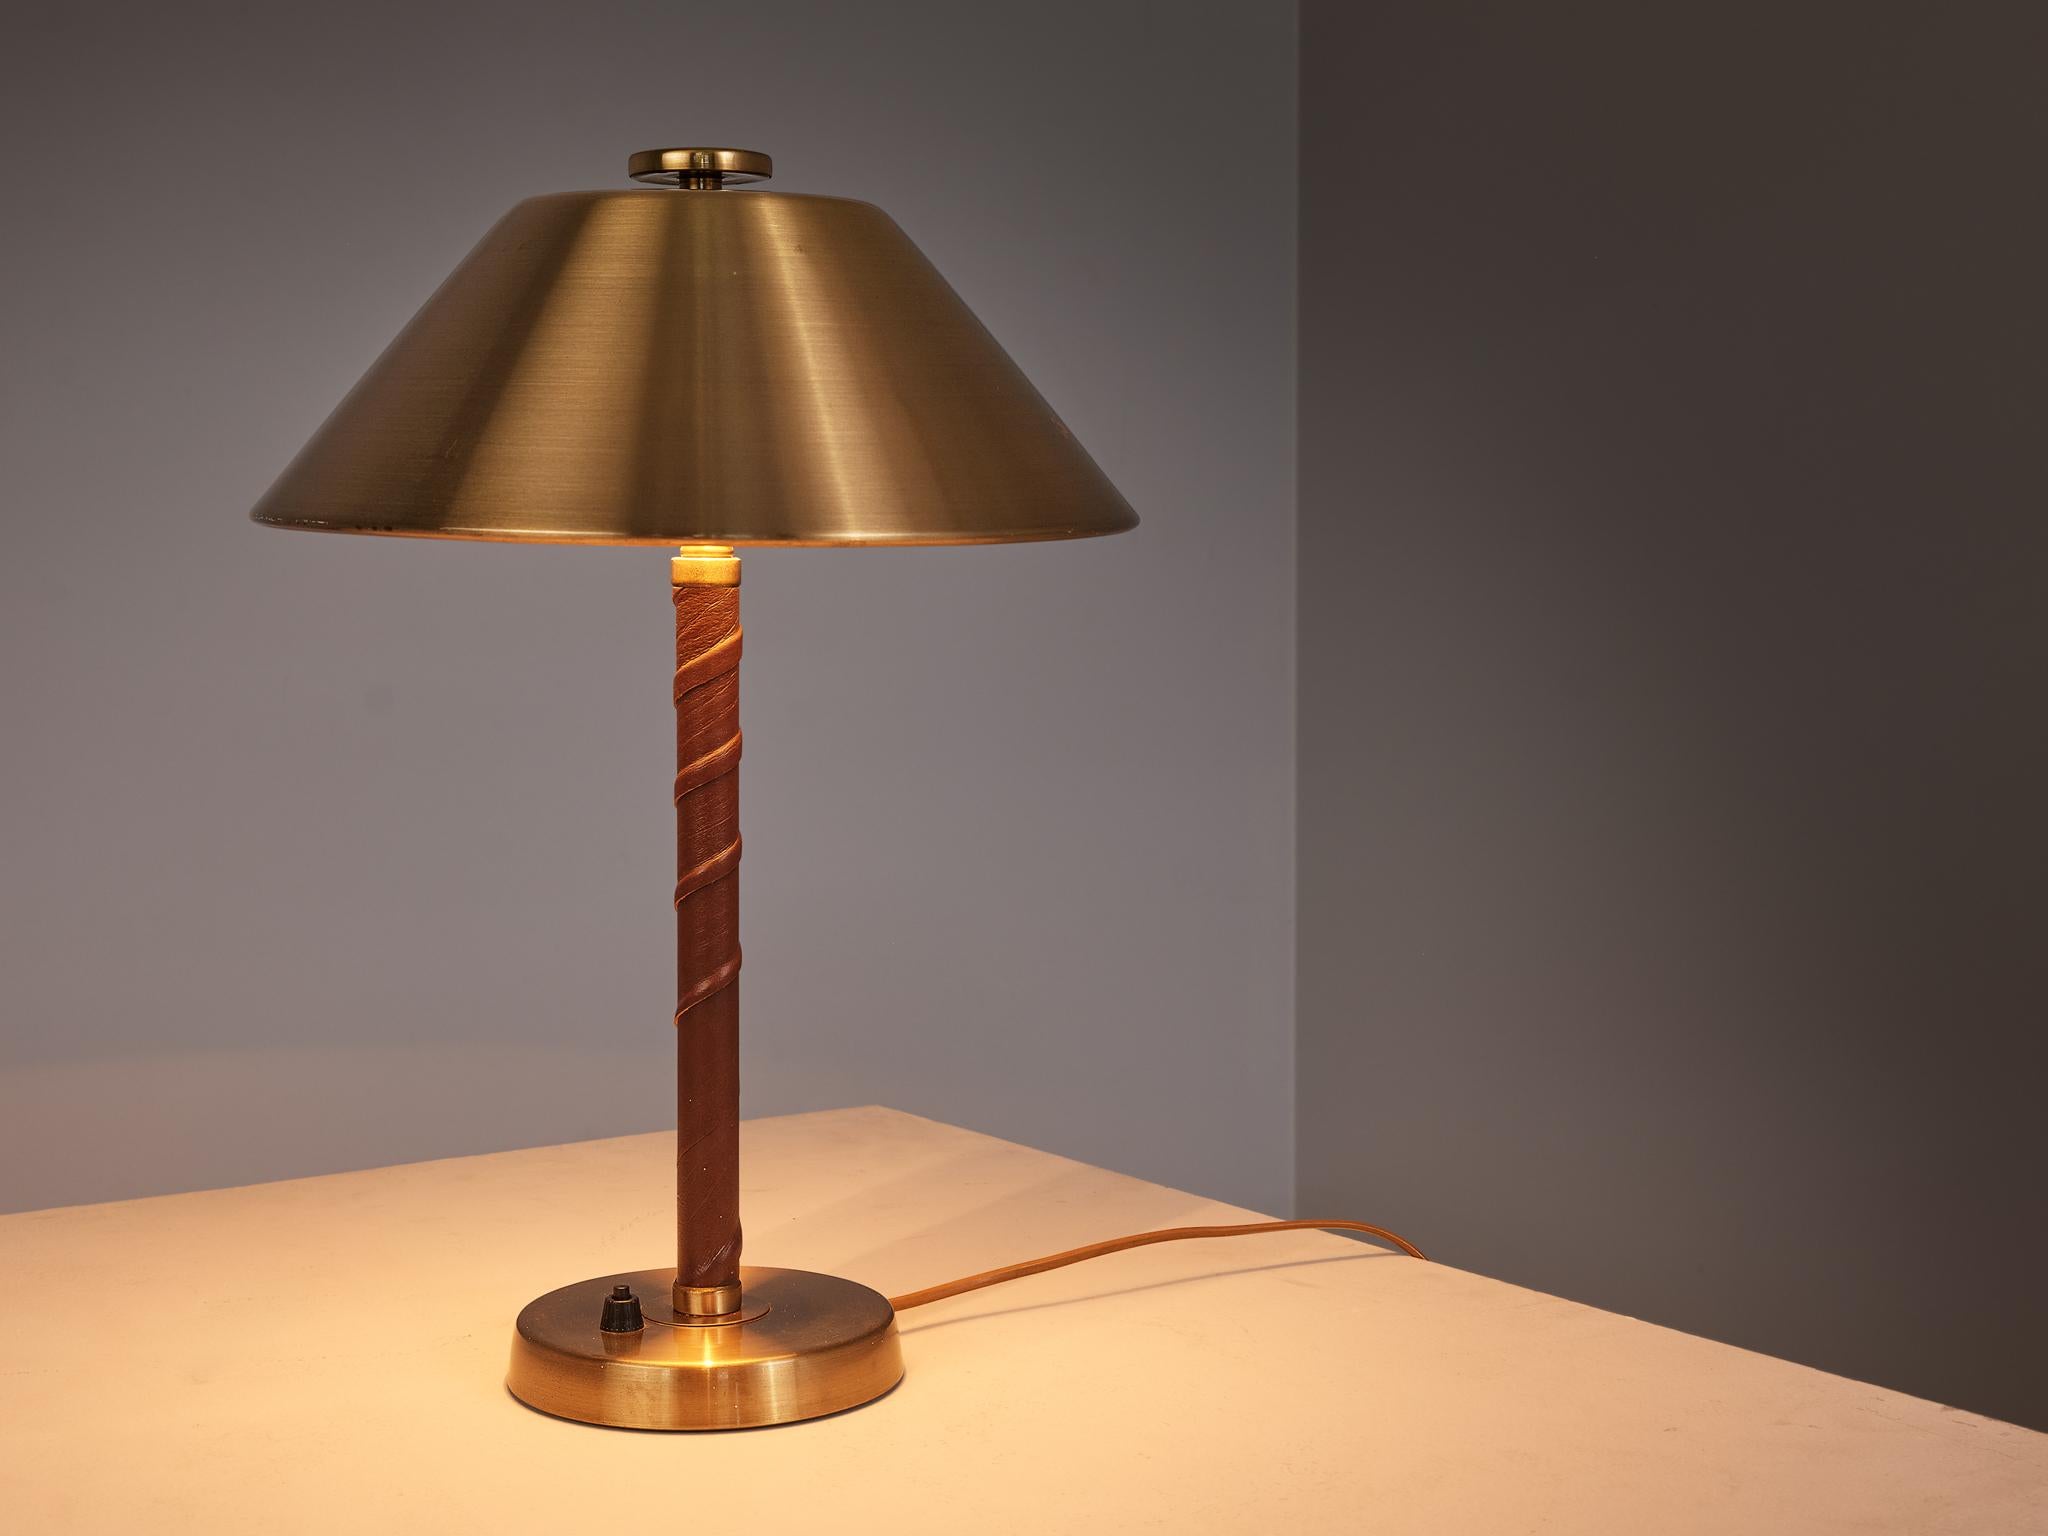 Einar Bäckström, table lamp, model 5014, brushed brass, leather, Sweden, 1940s. 

This table lamp is designed by Swedish designer Einar Bäckström in his workshop in Malmö, which he founded in 1918. This table lamp is a delightfully distinctive model